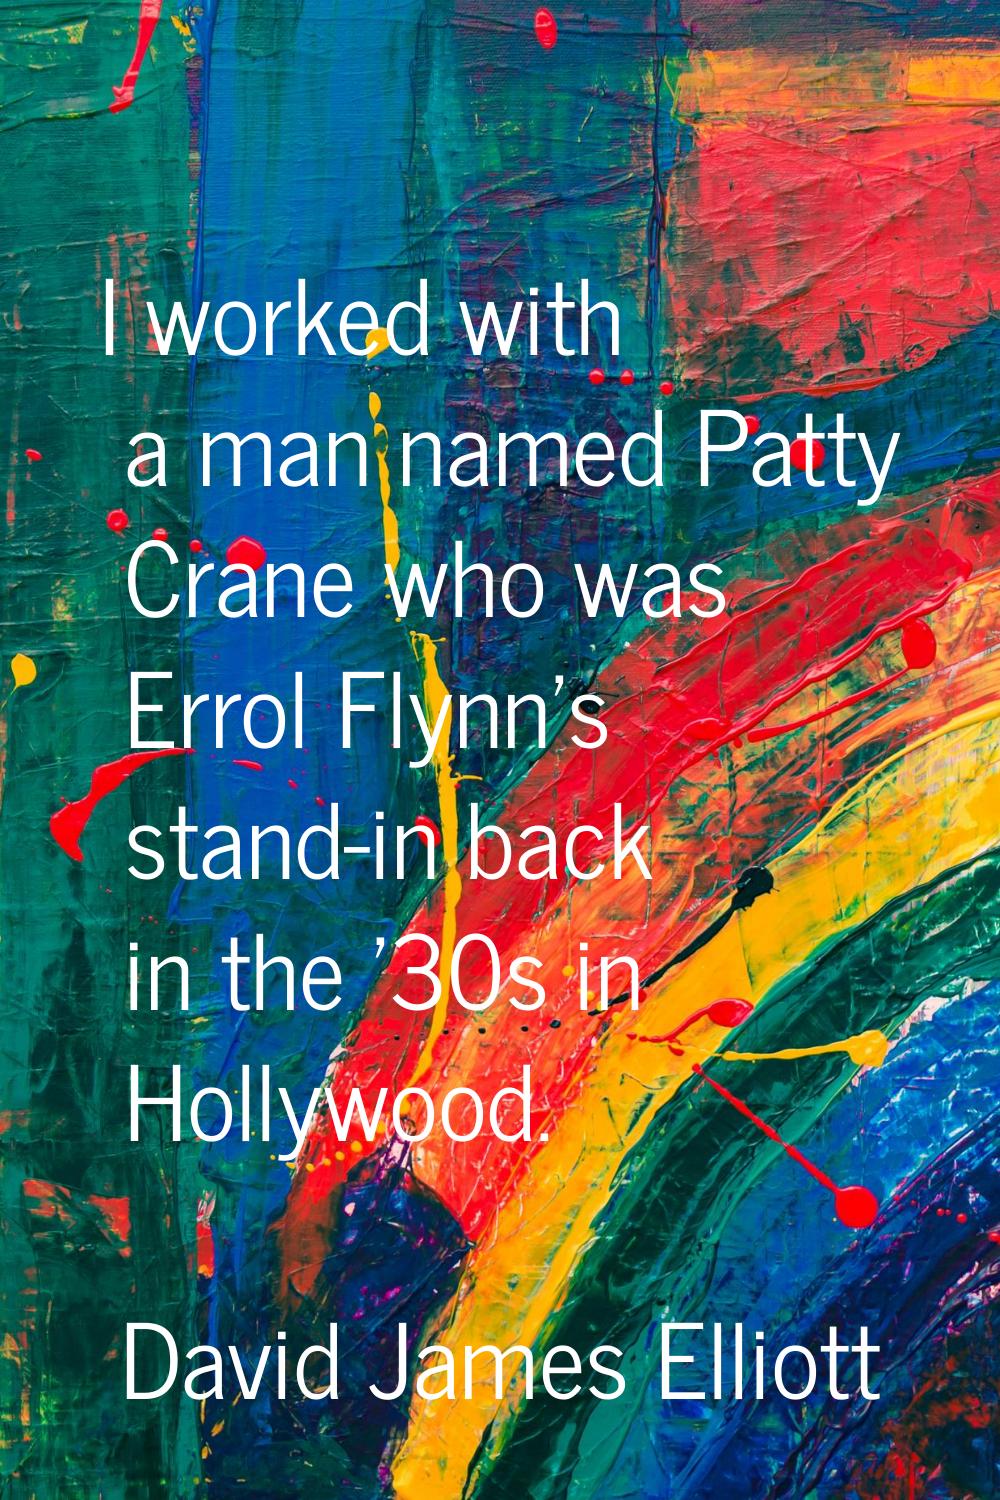 I worked with a man named Patty Crane who was Errol Flynn's stand-in back in the '30s in Hollywood.